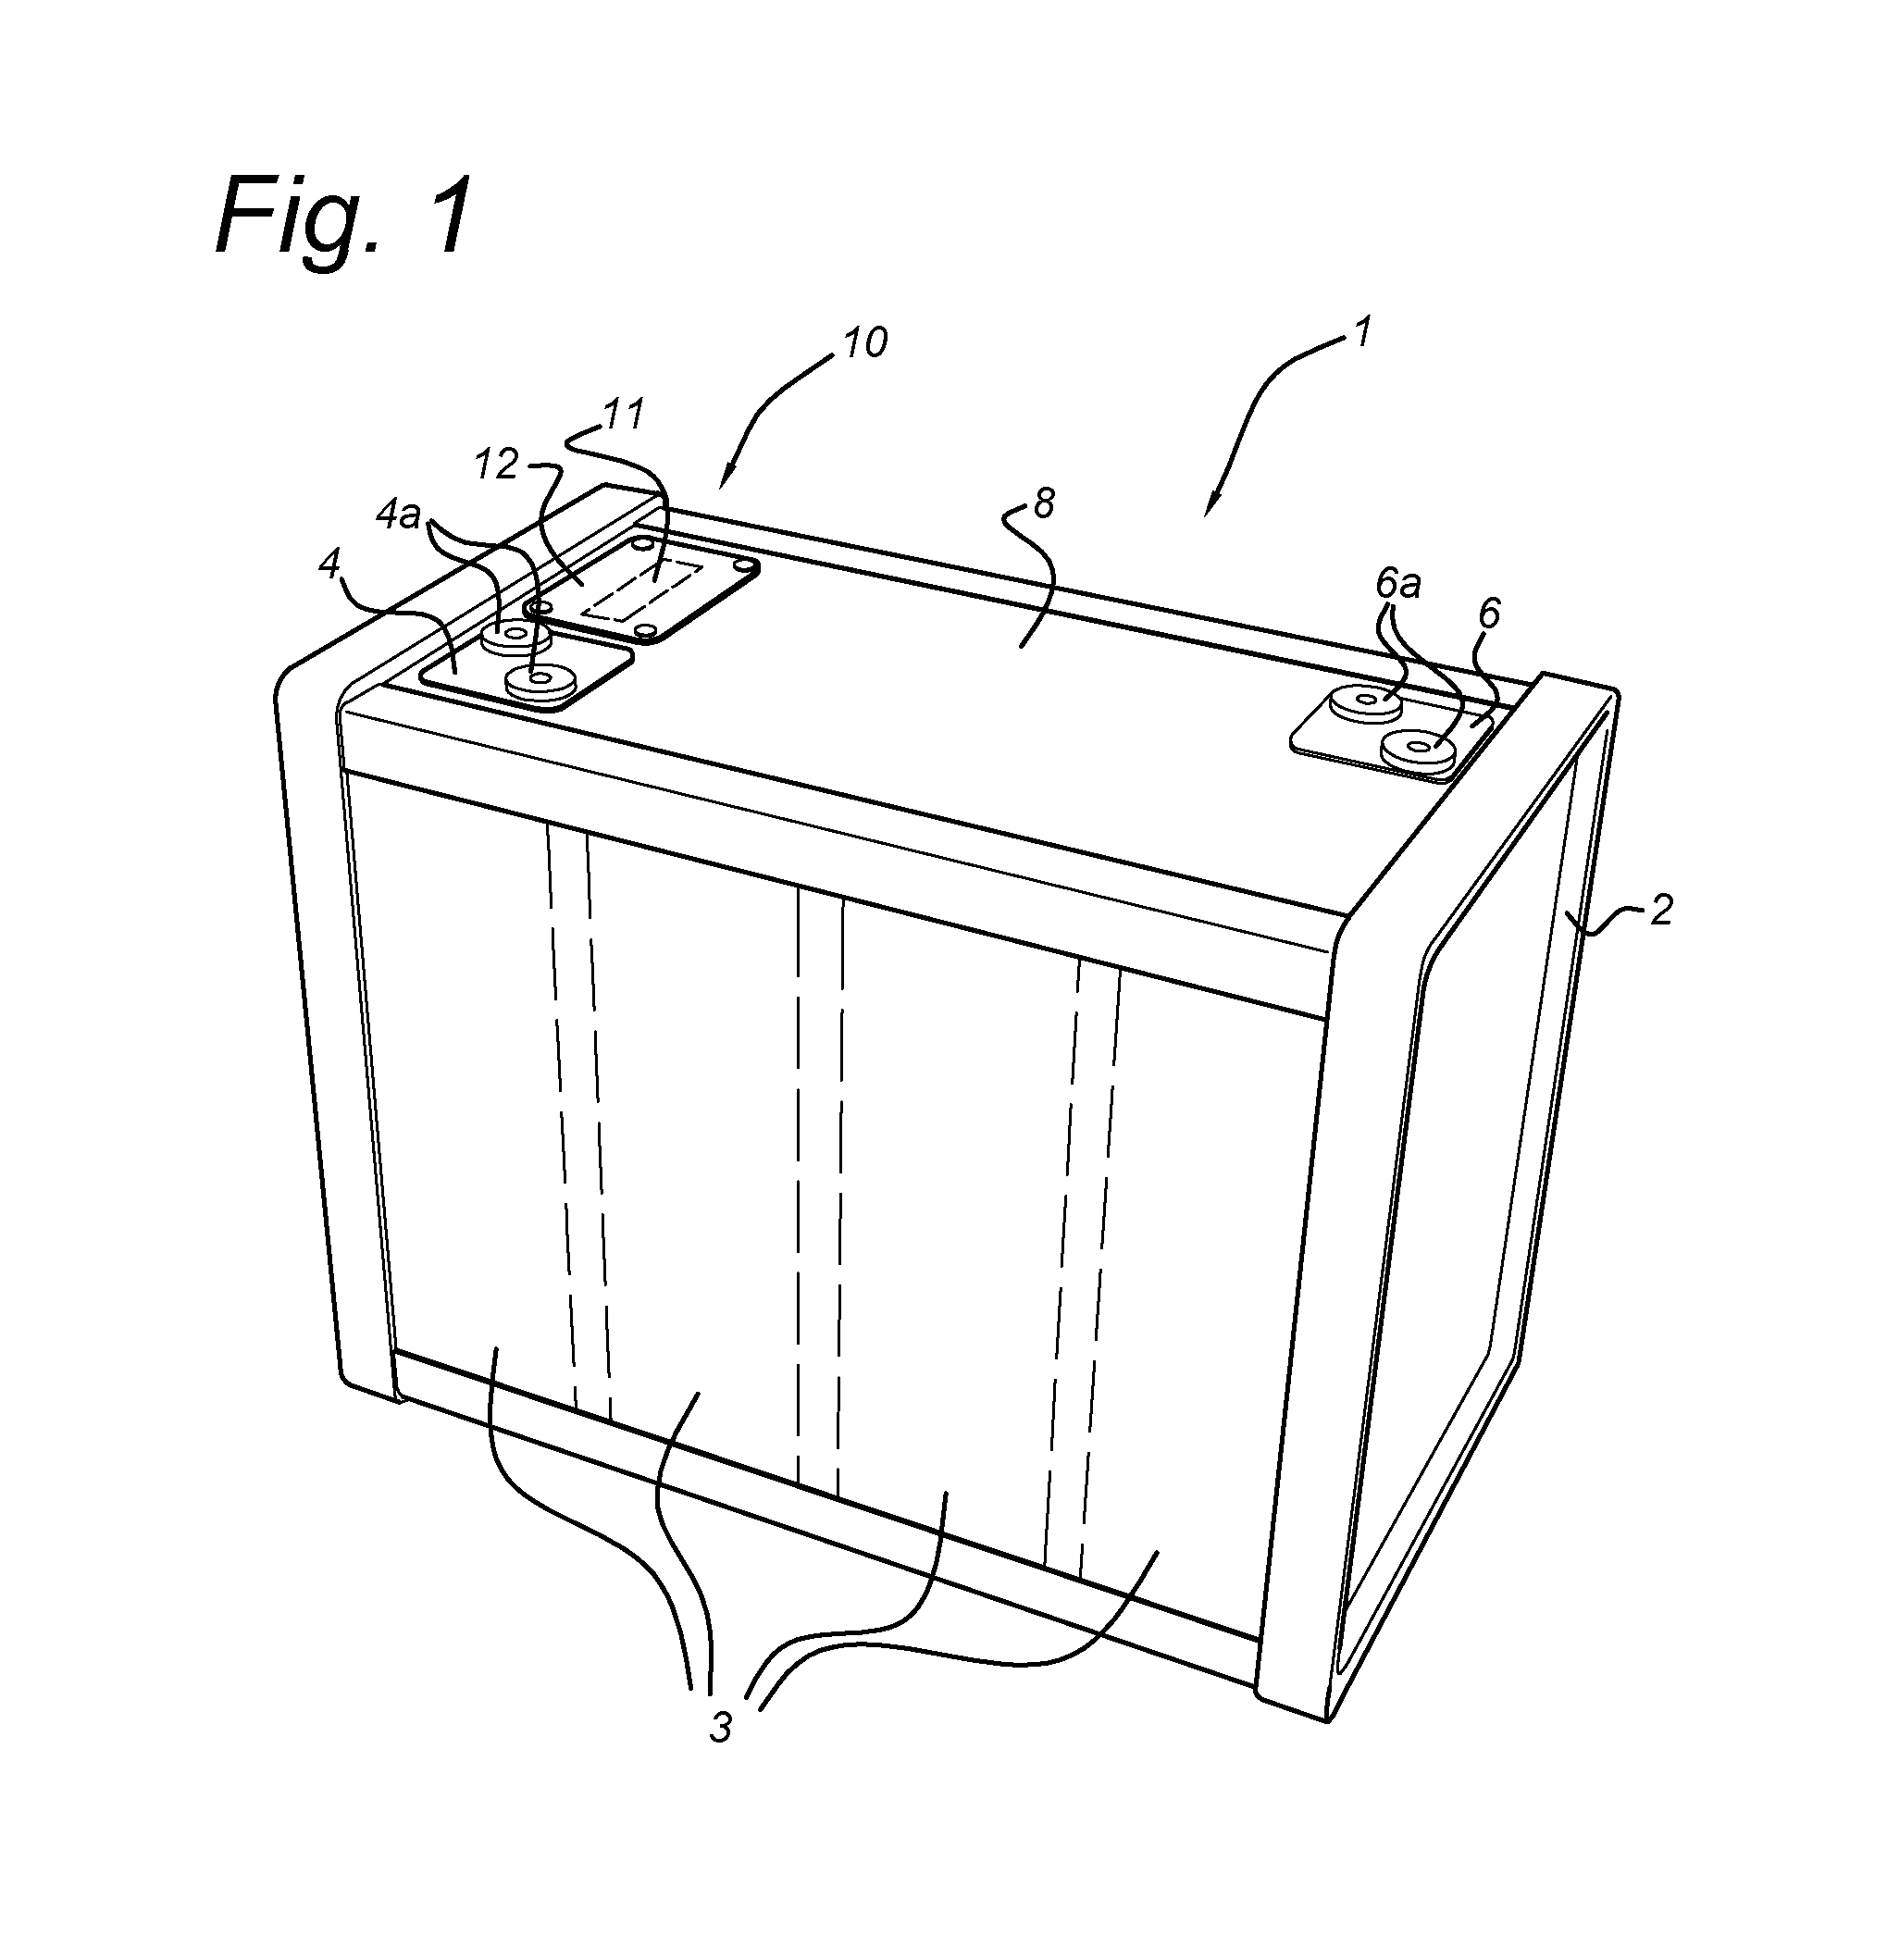 Battery with integrated fuse